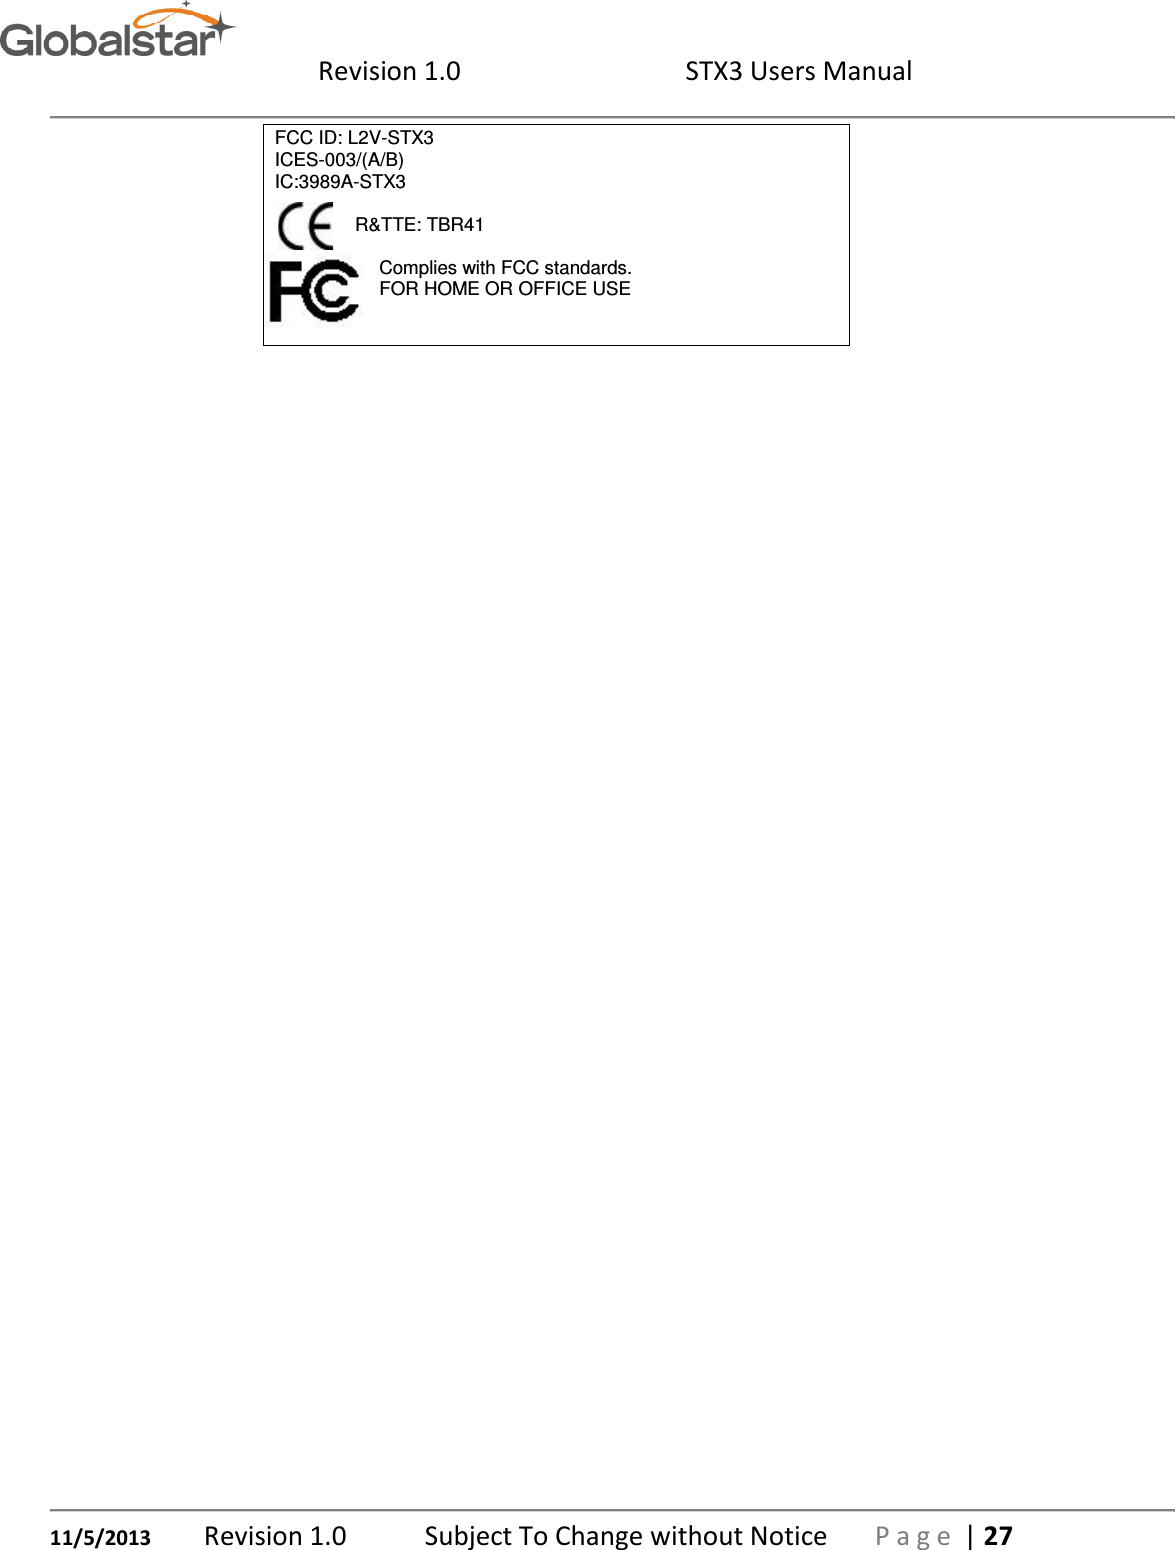  Revision 1.0  STX3 Users Manual   11/5/2013 Revision 1.0   Subject To Change without Notice  P a g e  | 27 FCC ID: L2V-STX3 ICES-003/(A/B) IC:3989A-STX3   R&amp;TTE: TBR41                       Complies with FCC standards.                     FOR HOME OR OFFICE USE      